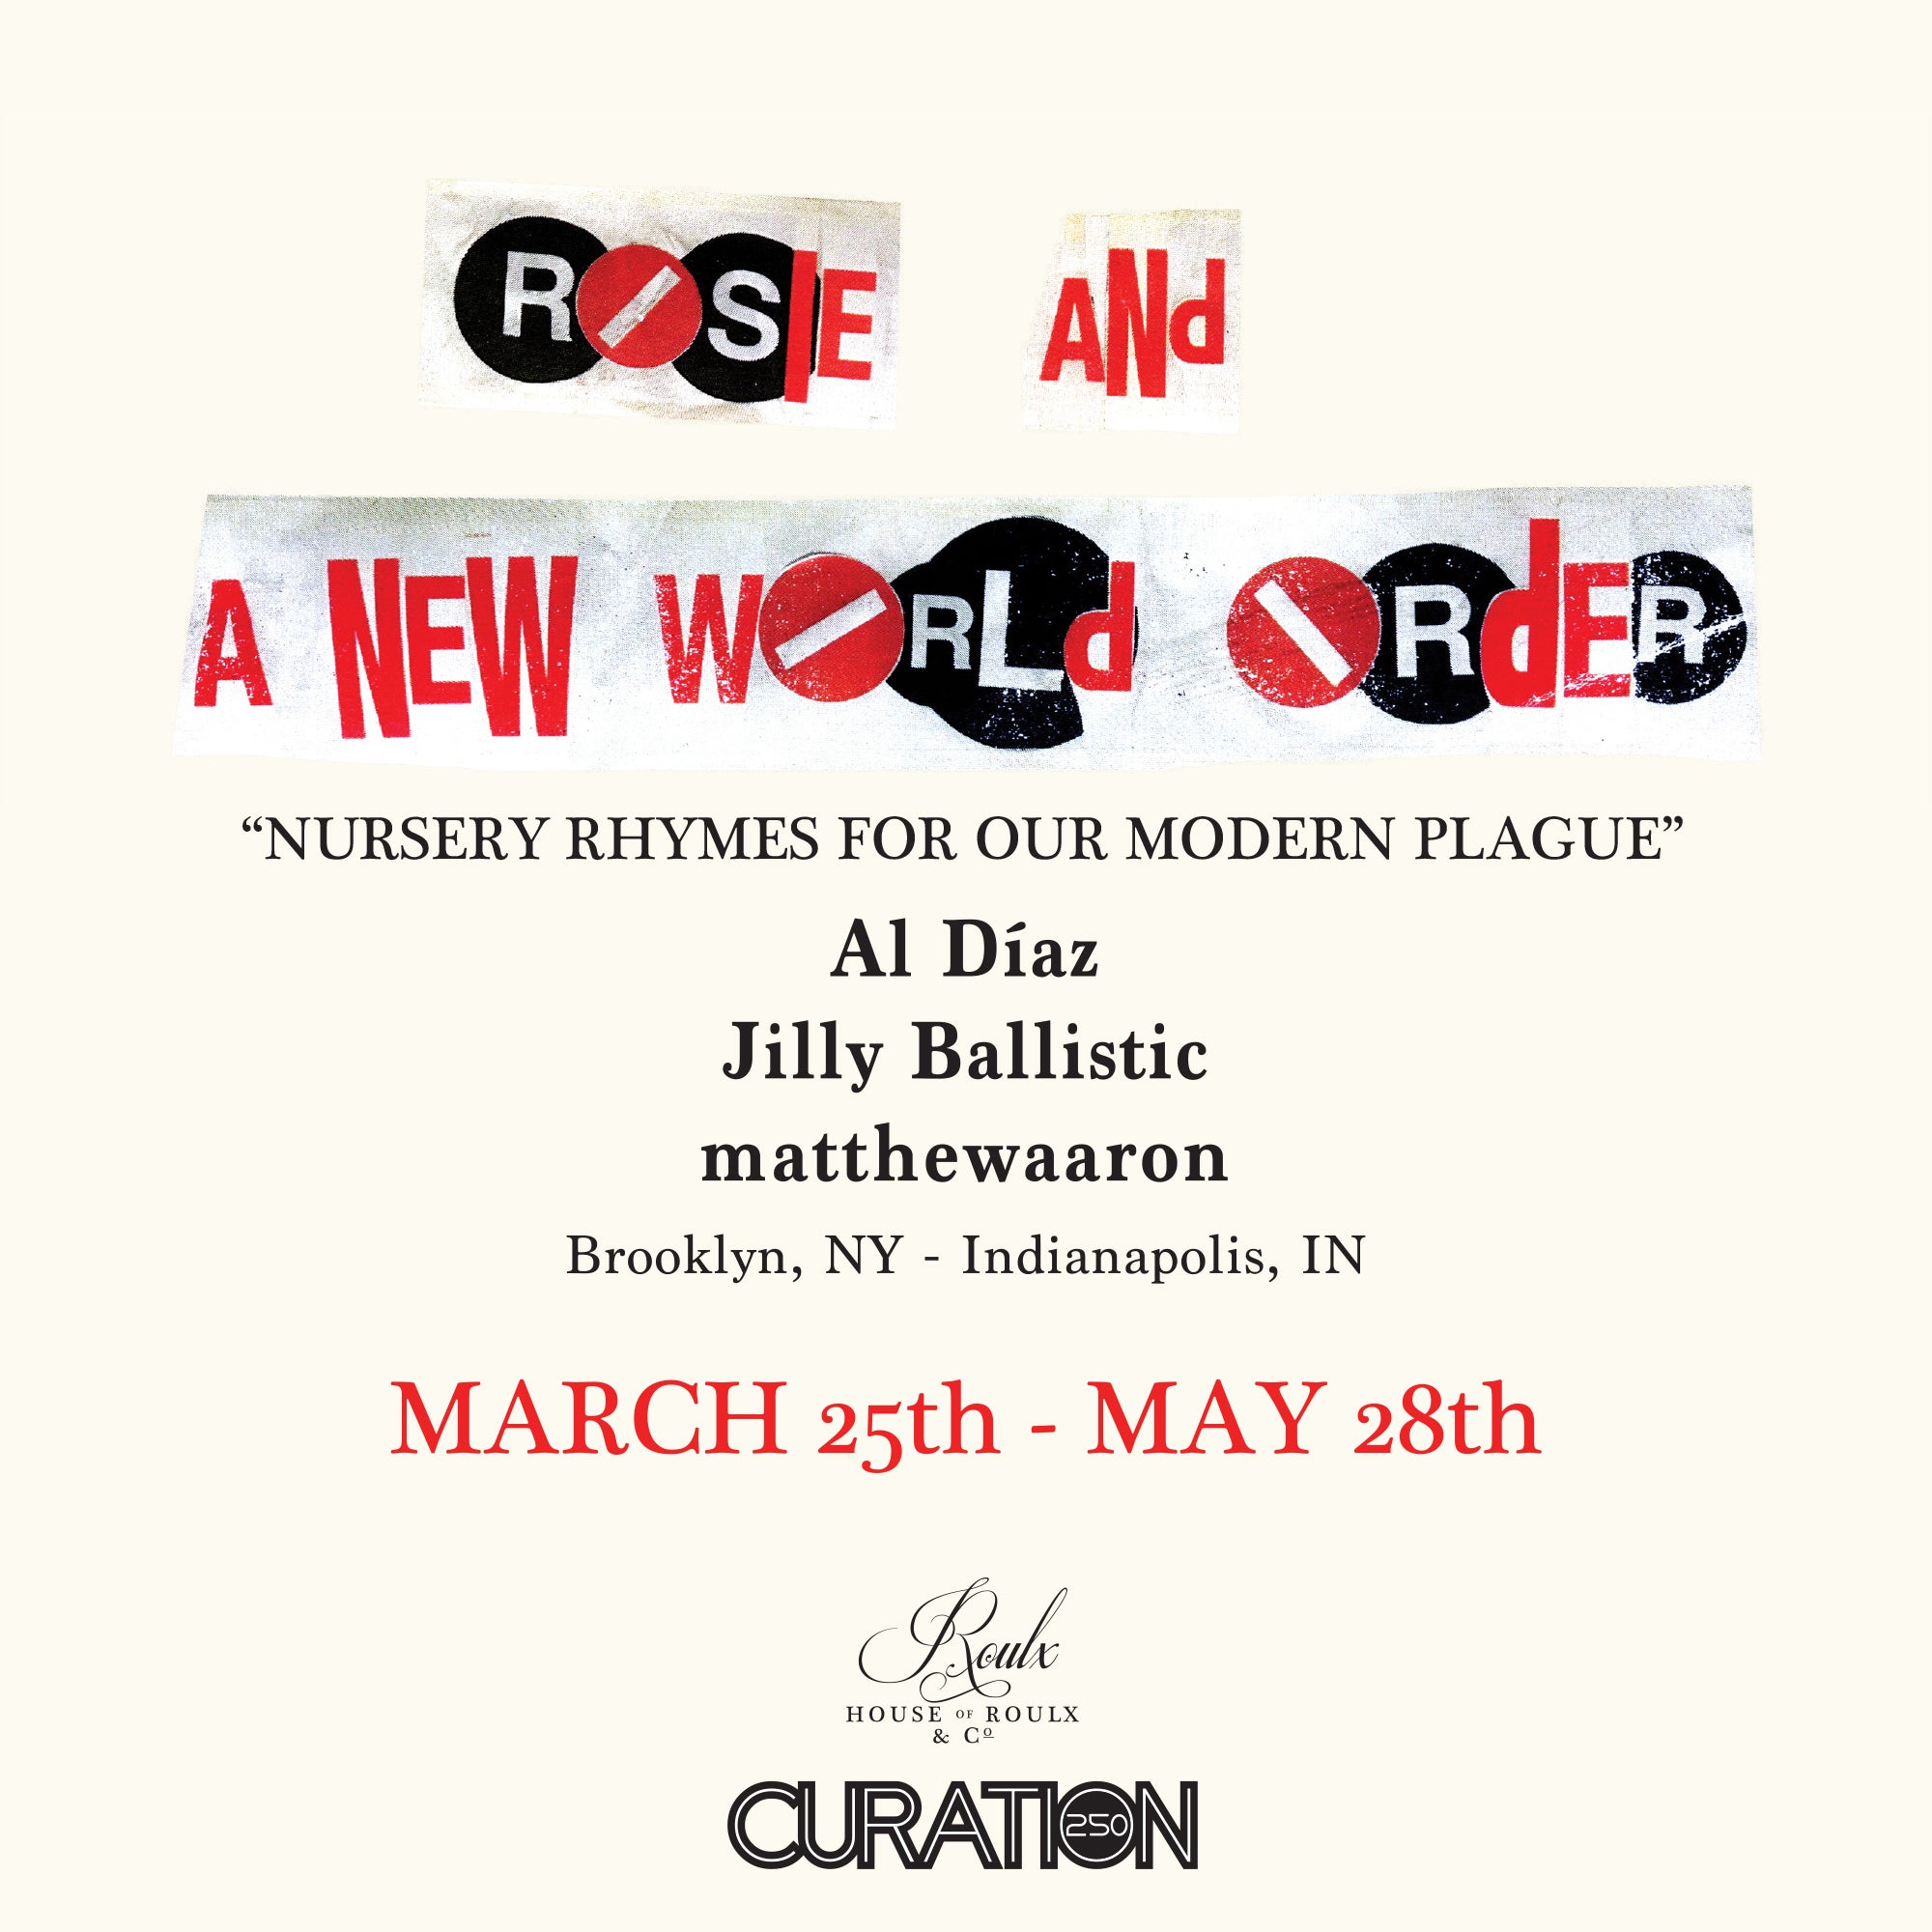 ROSIE AND A NEW WORLD ORDER EXHIBIT: Al Díaz, Jilly Ballistic and matthewaaron, Lowell, MA